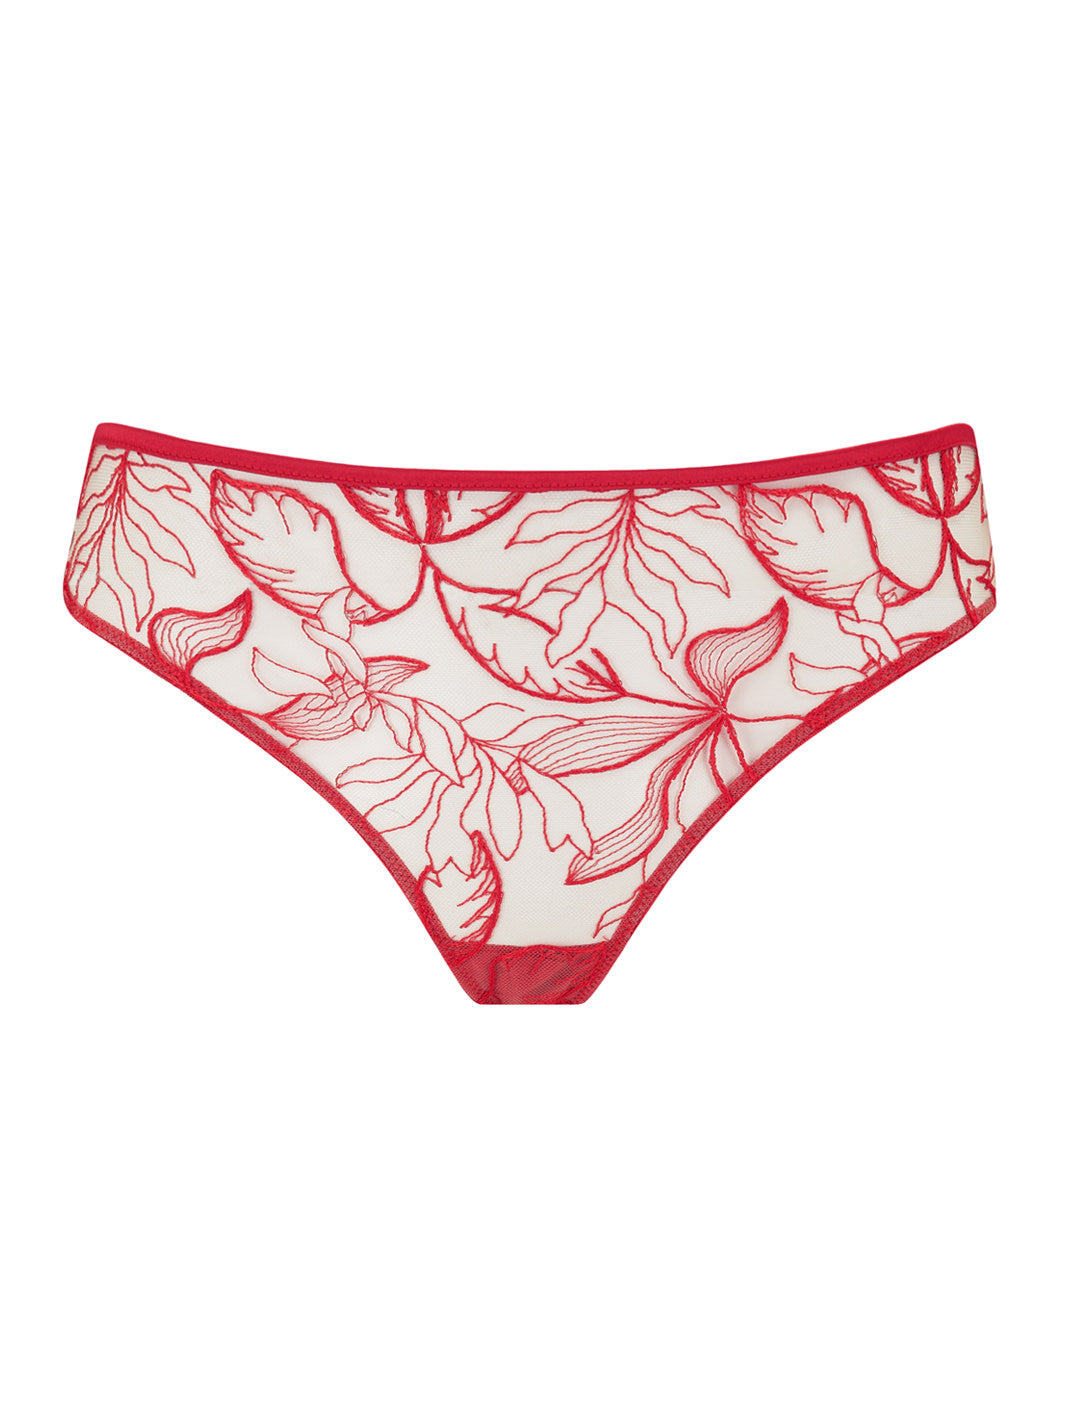 Vivian red embroidered knickers